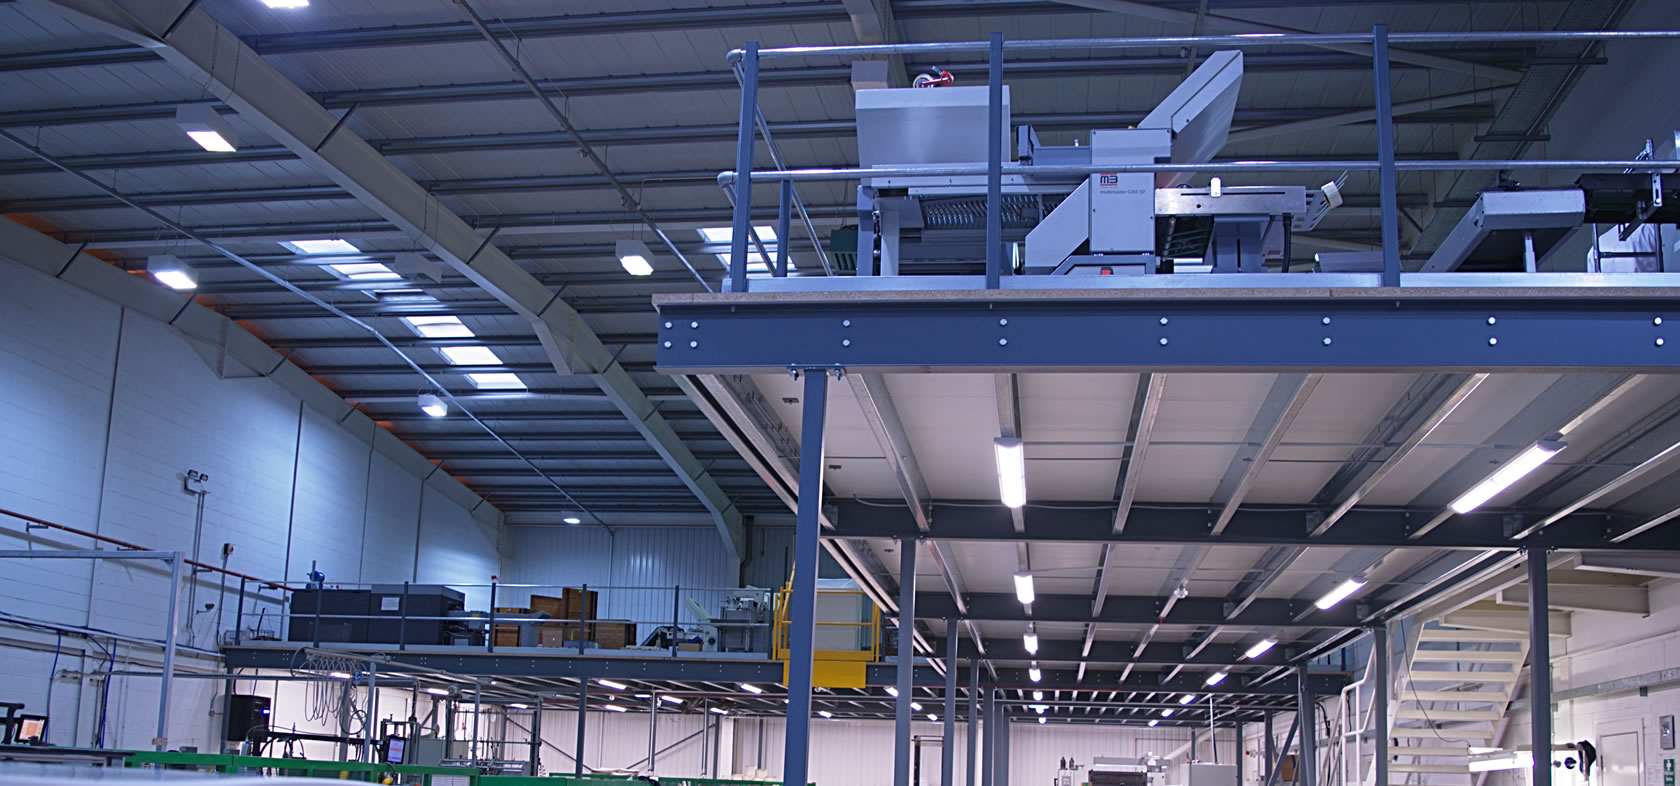 Mezzanine floor costs in warehouse facility installed by Thistle Systems, Scotland.